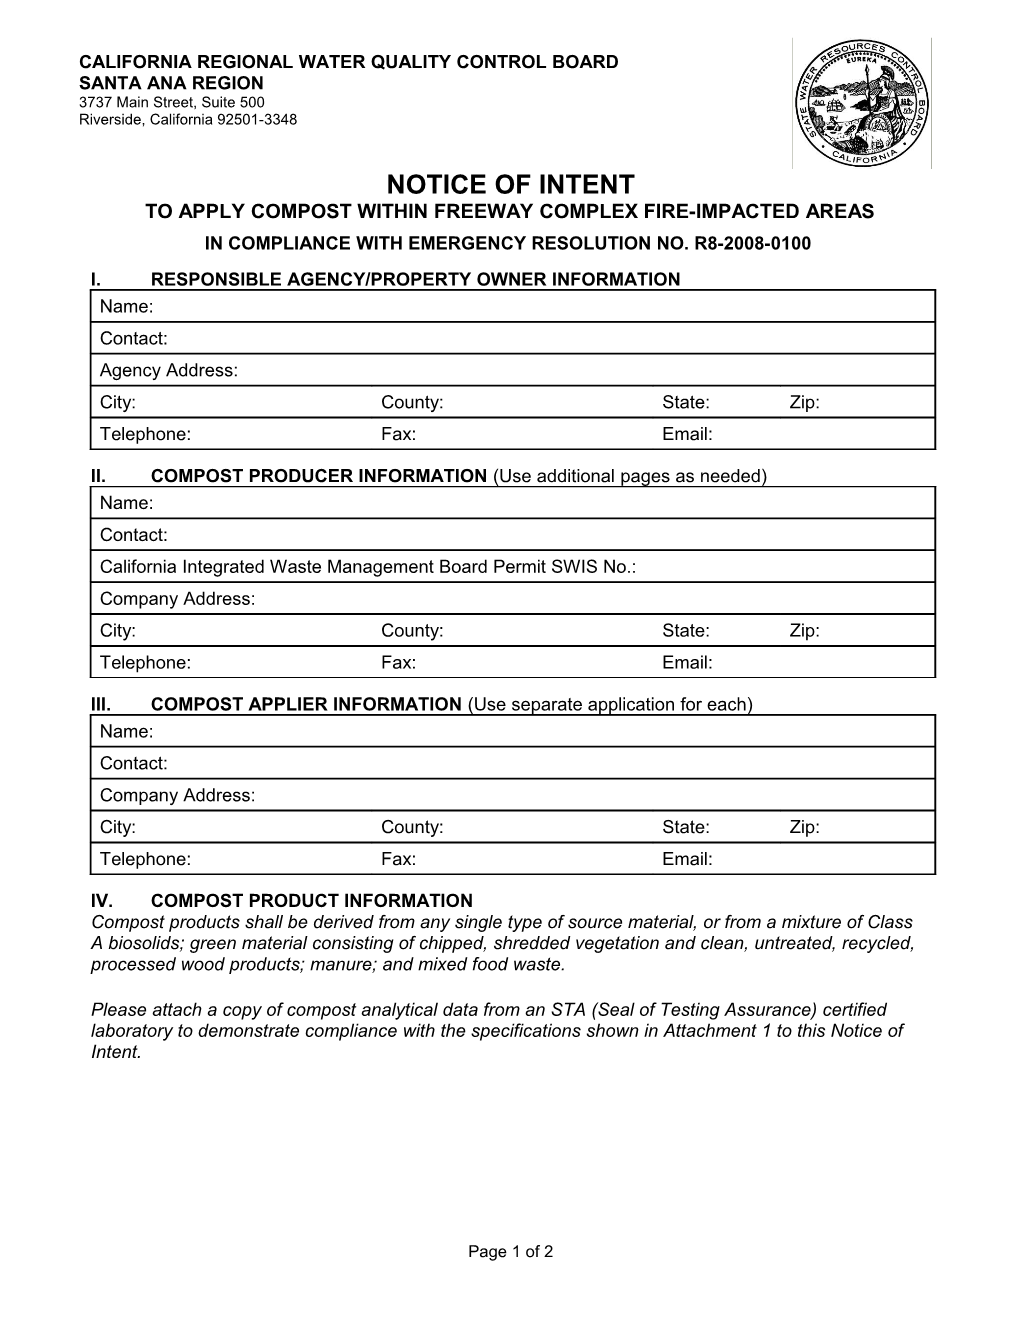 Notice of Intent to Comply with Emergency Resolution R8-2008-0100